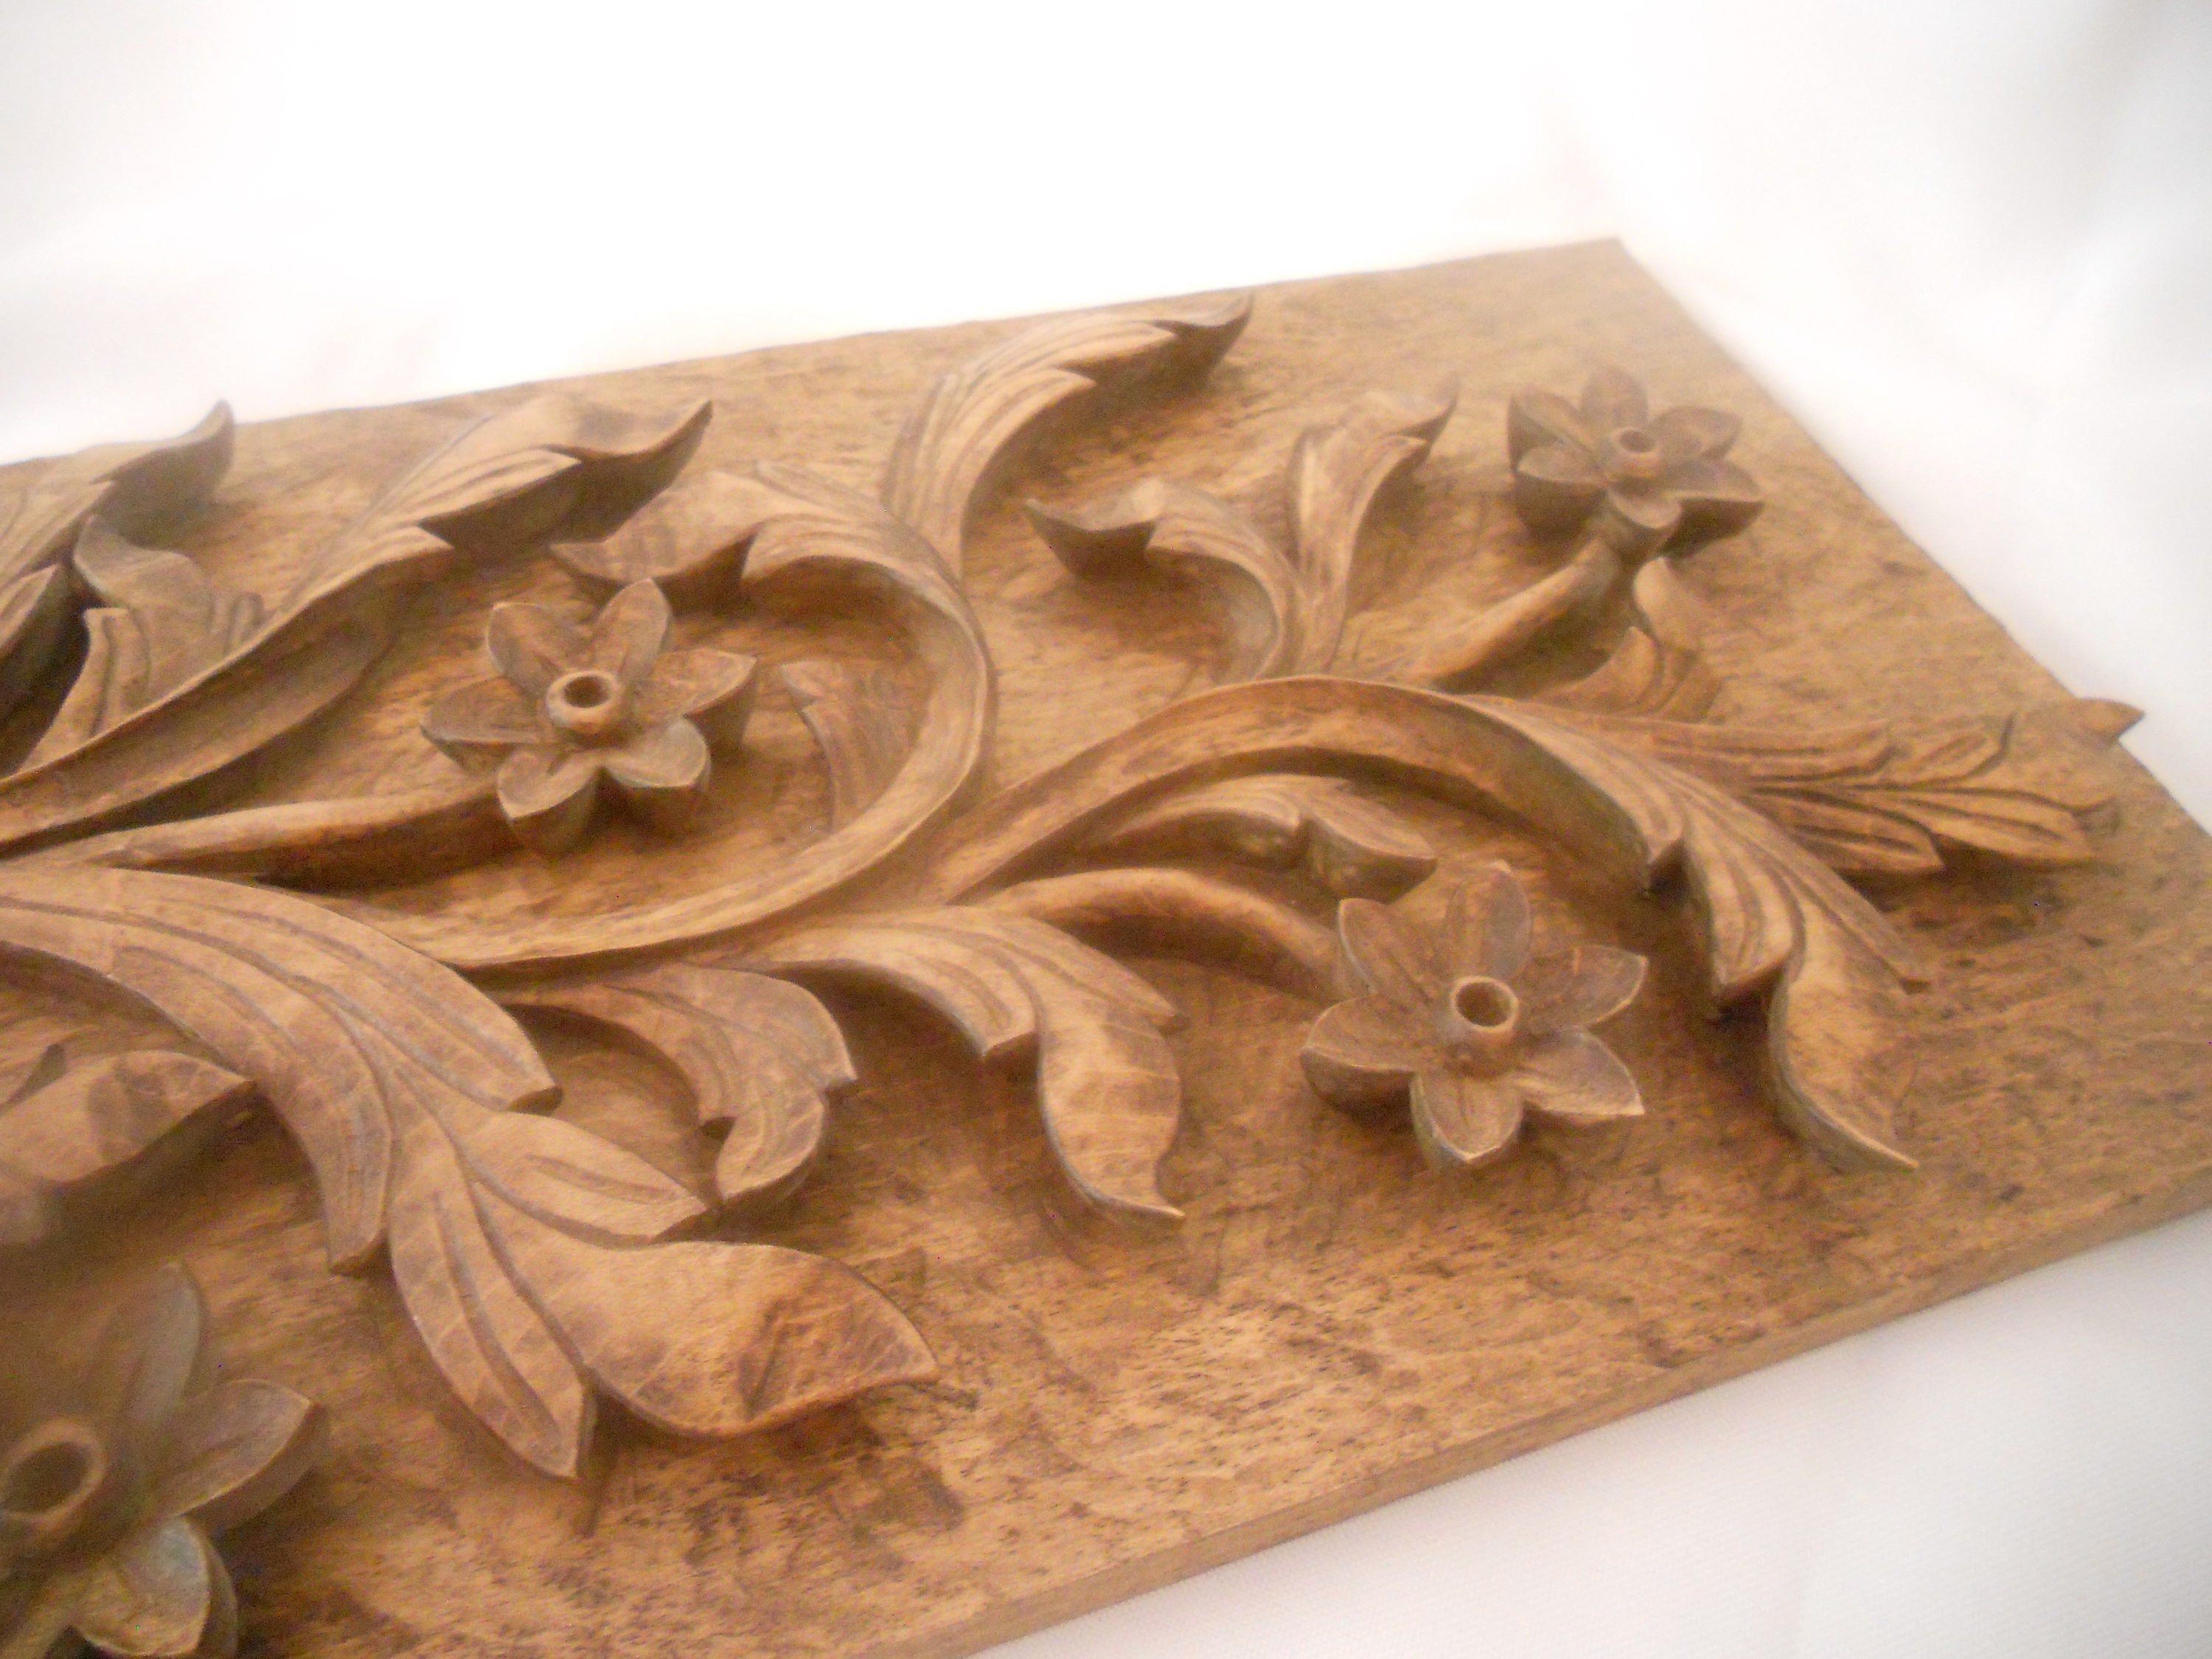 Hand-Carved Wooden Plaque Featuring a Maple-Leaf by Sayid Ghanbari